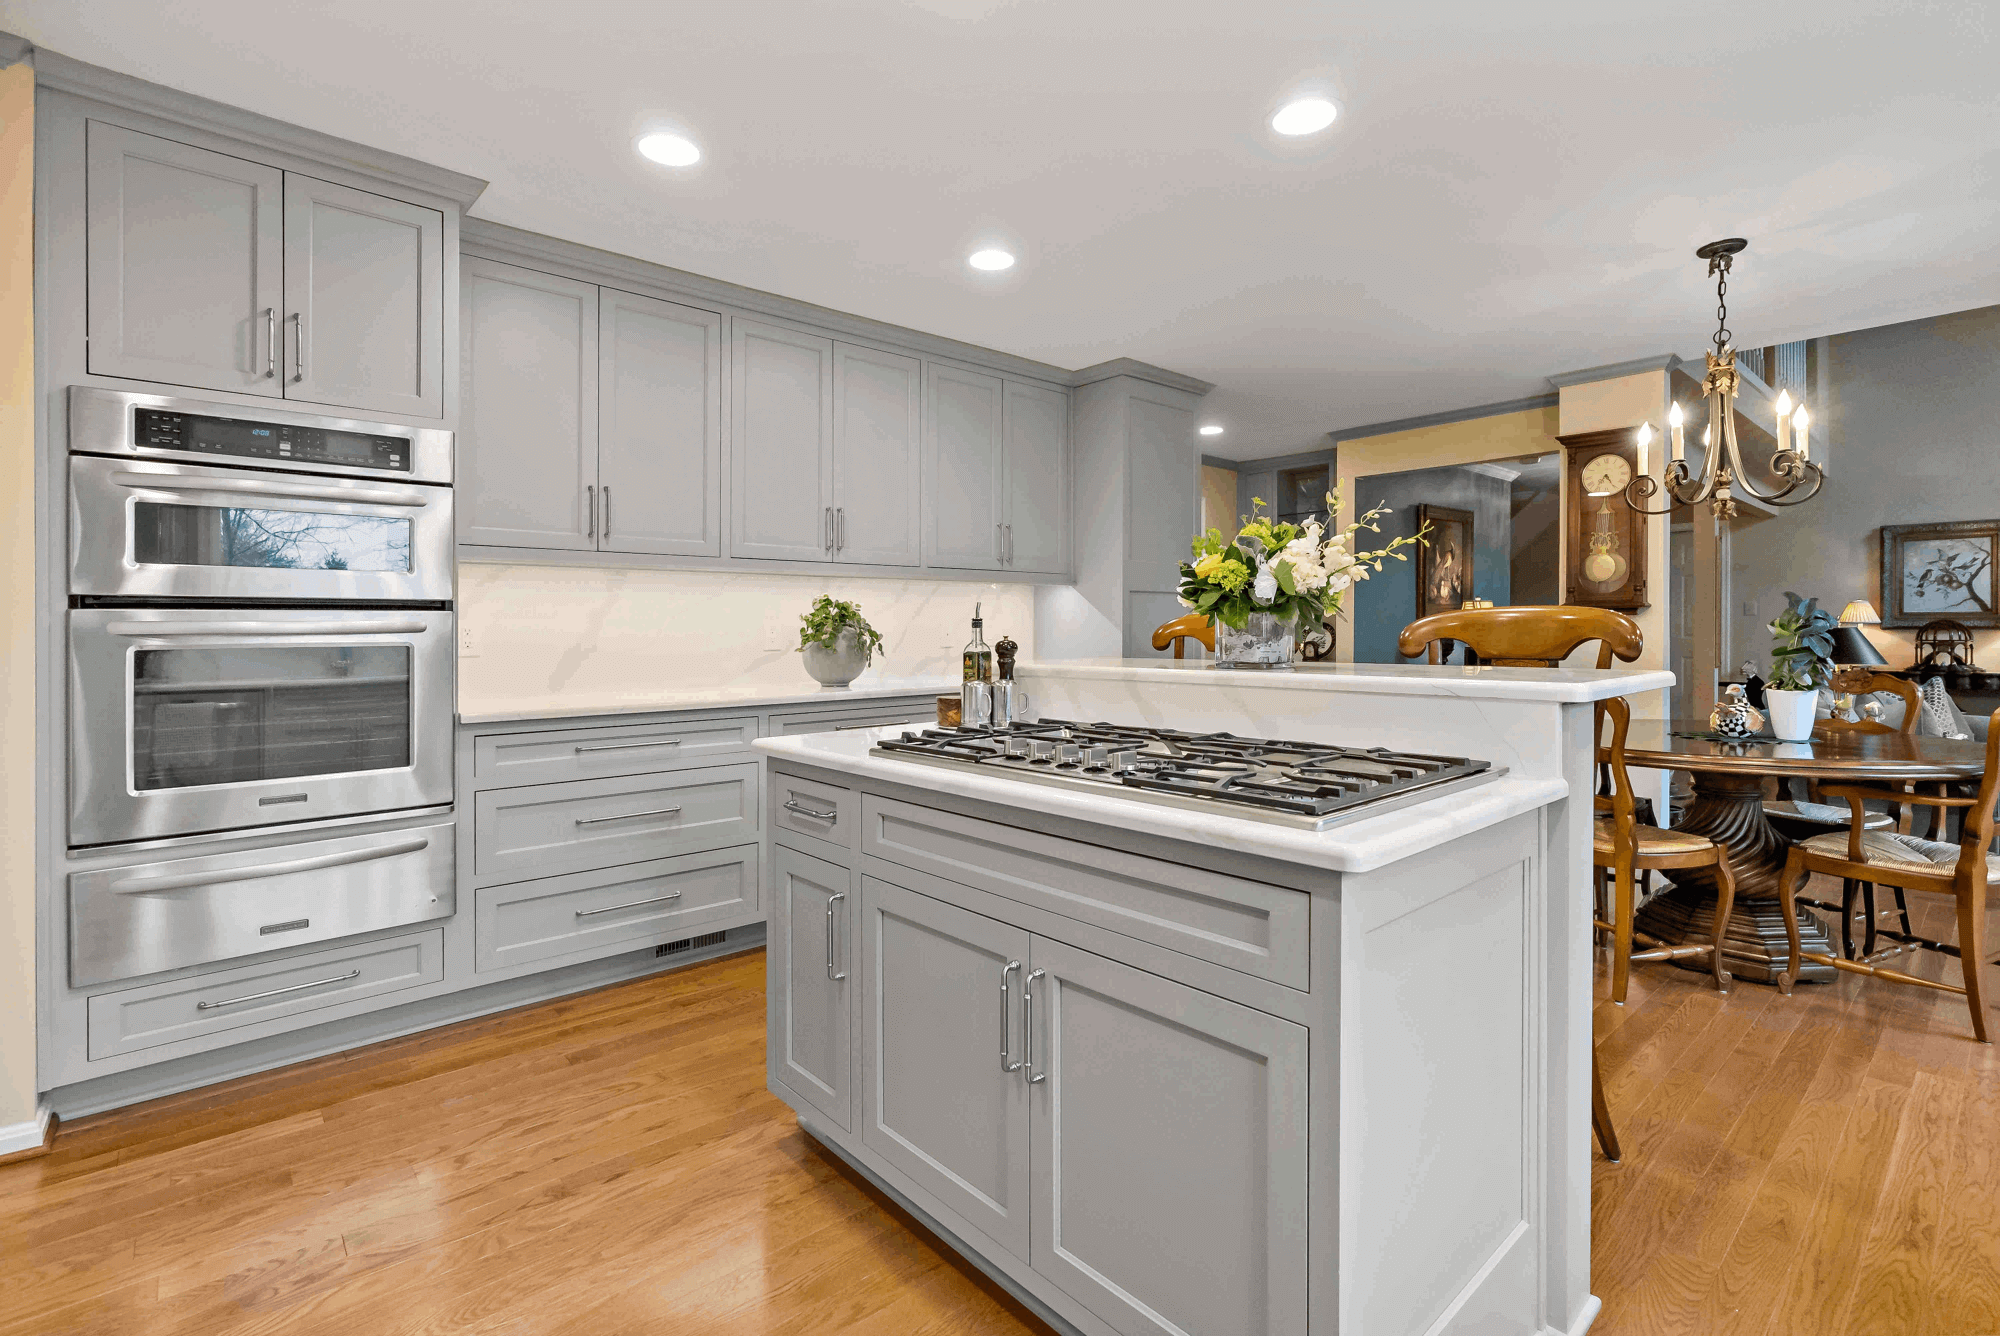 Grey cabinetry and hard wood floors in kitchen